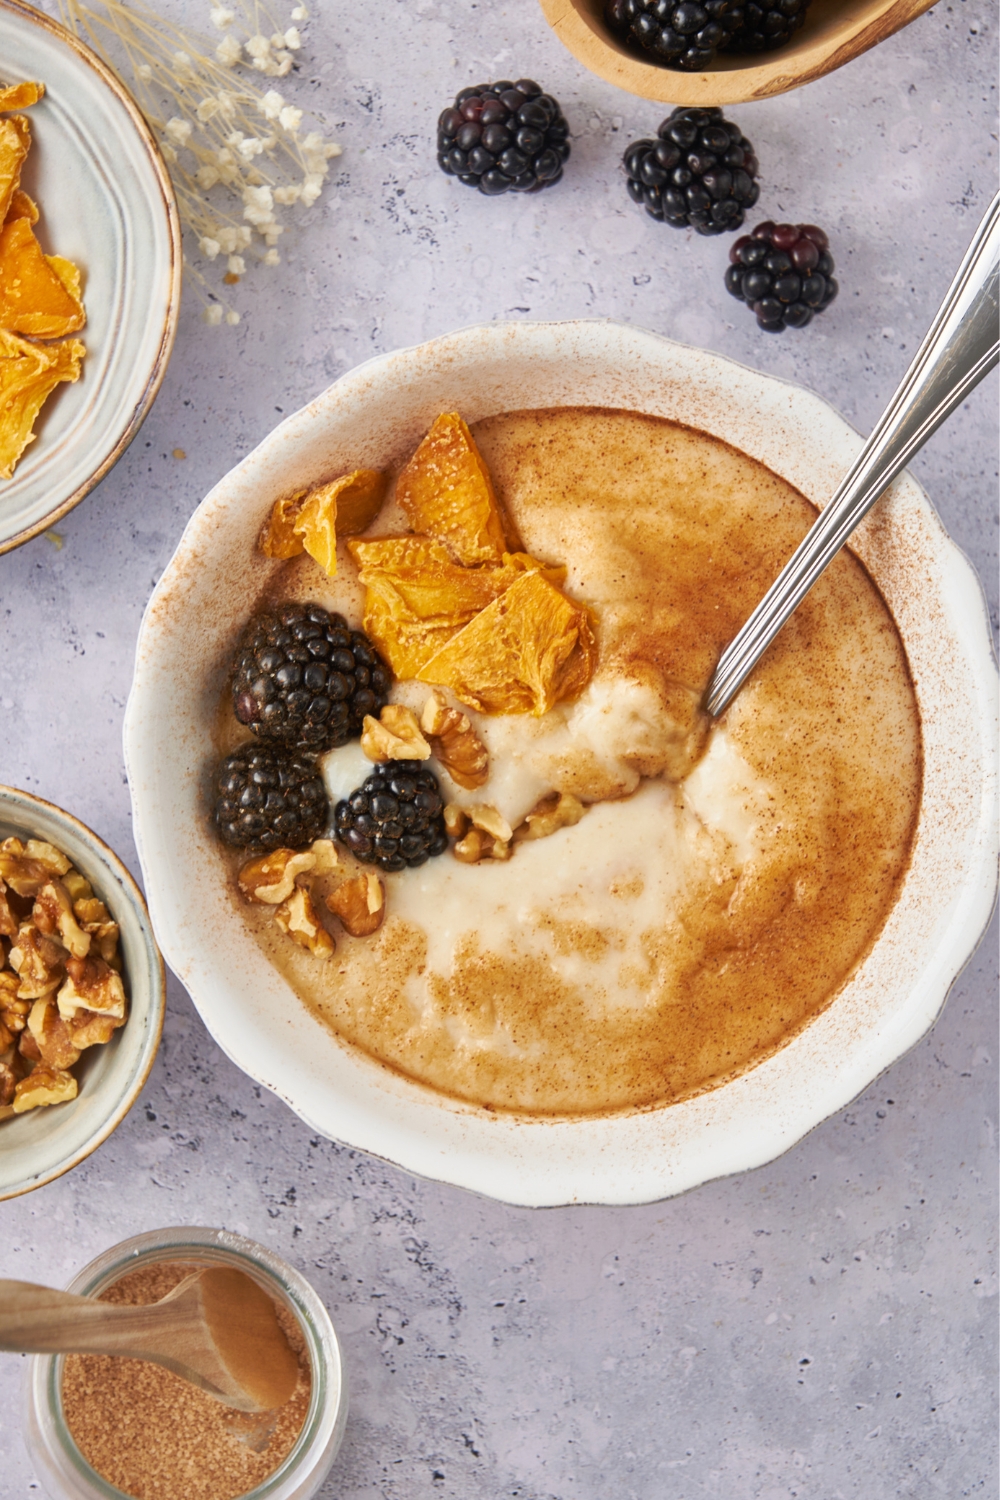 A bowl with cream of wheat topped with cinnamon, berries, dried mango, and walnuts. A spoon is in the bowl.